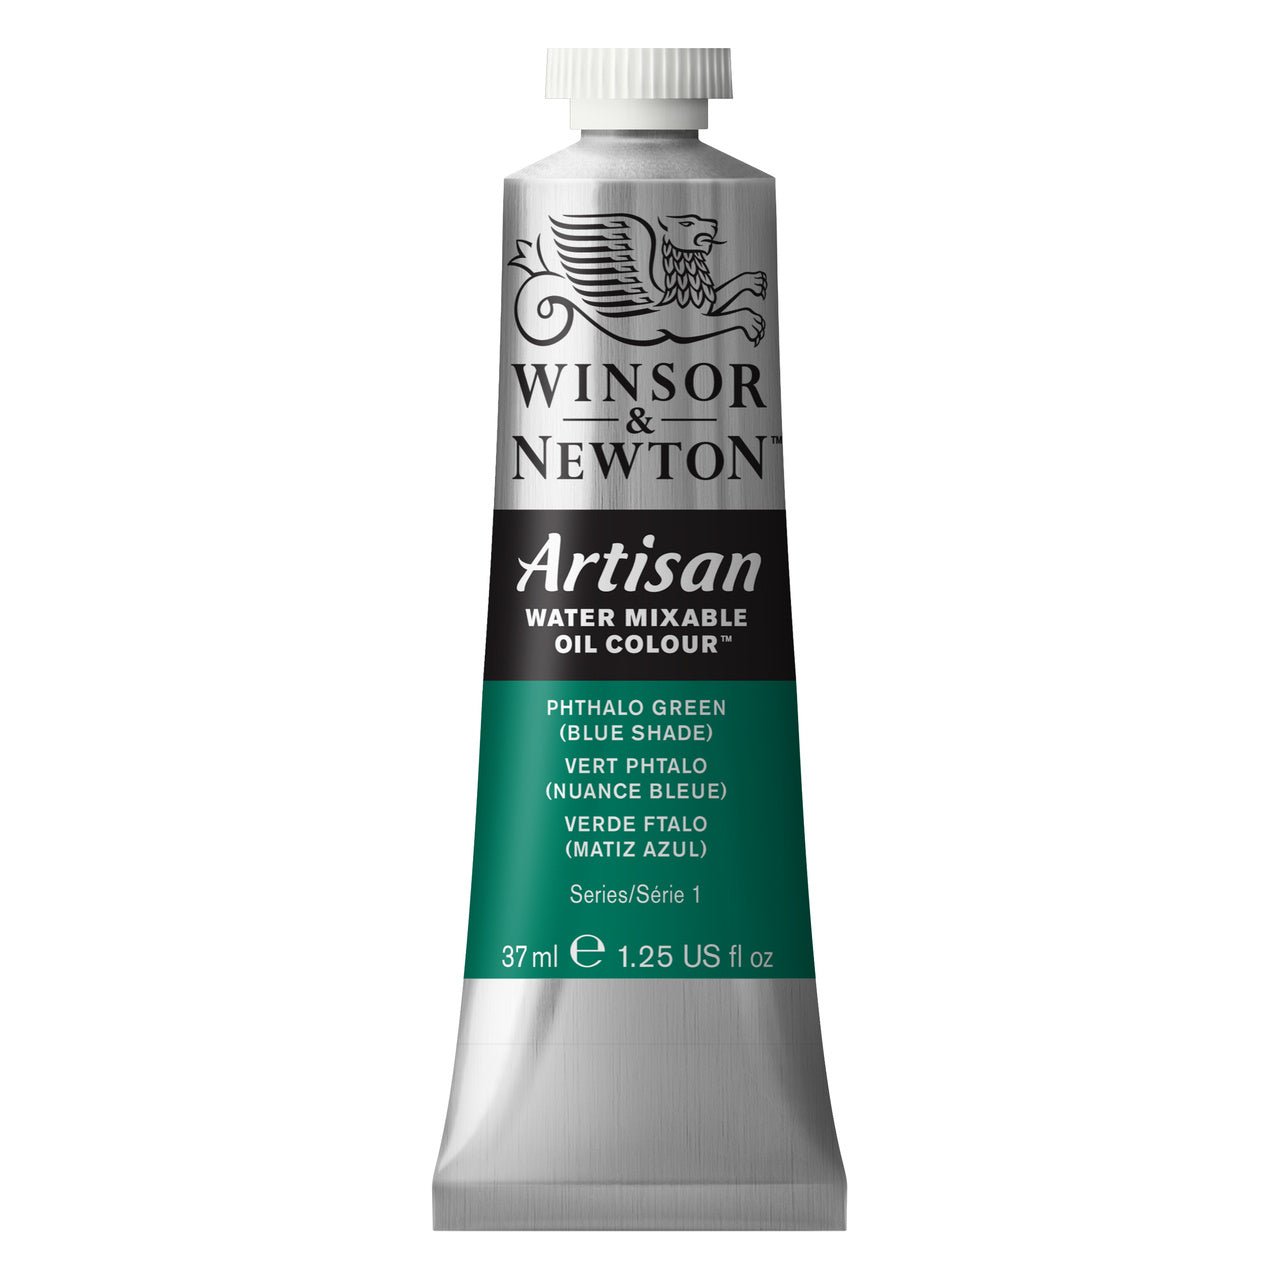 Winsor & Newton Artisan Water Mixable Oil 37ml - Phthalo Green (Blue Shade) - merriartist.com